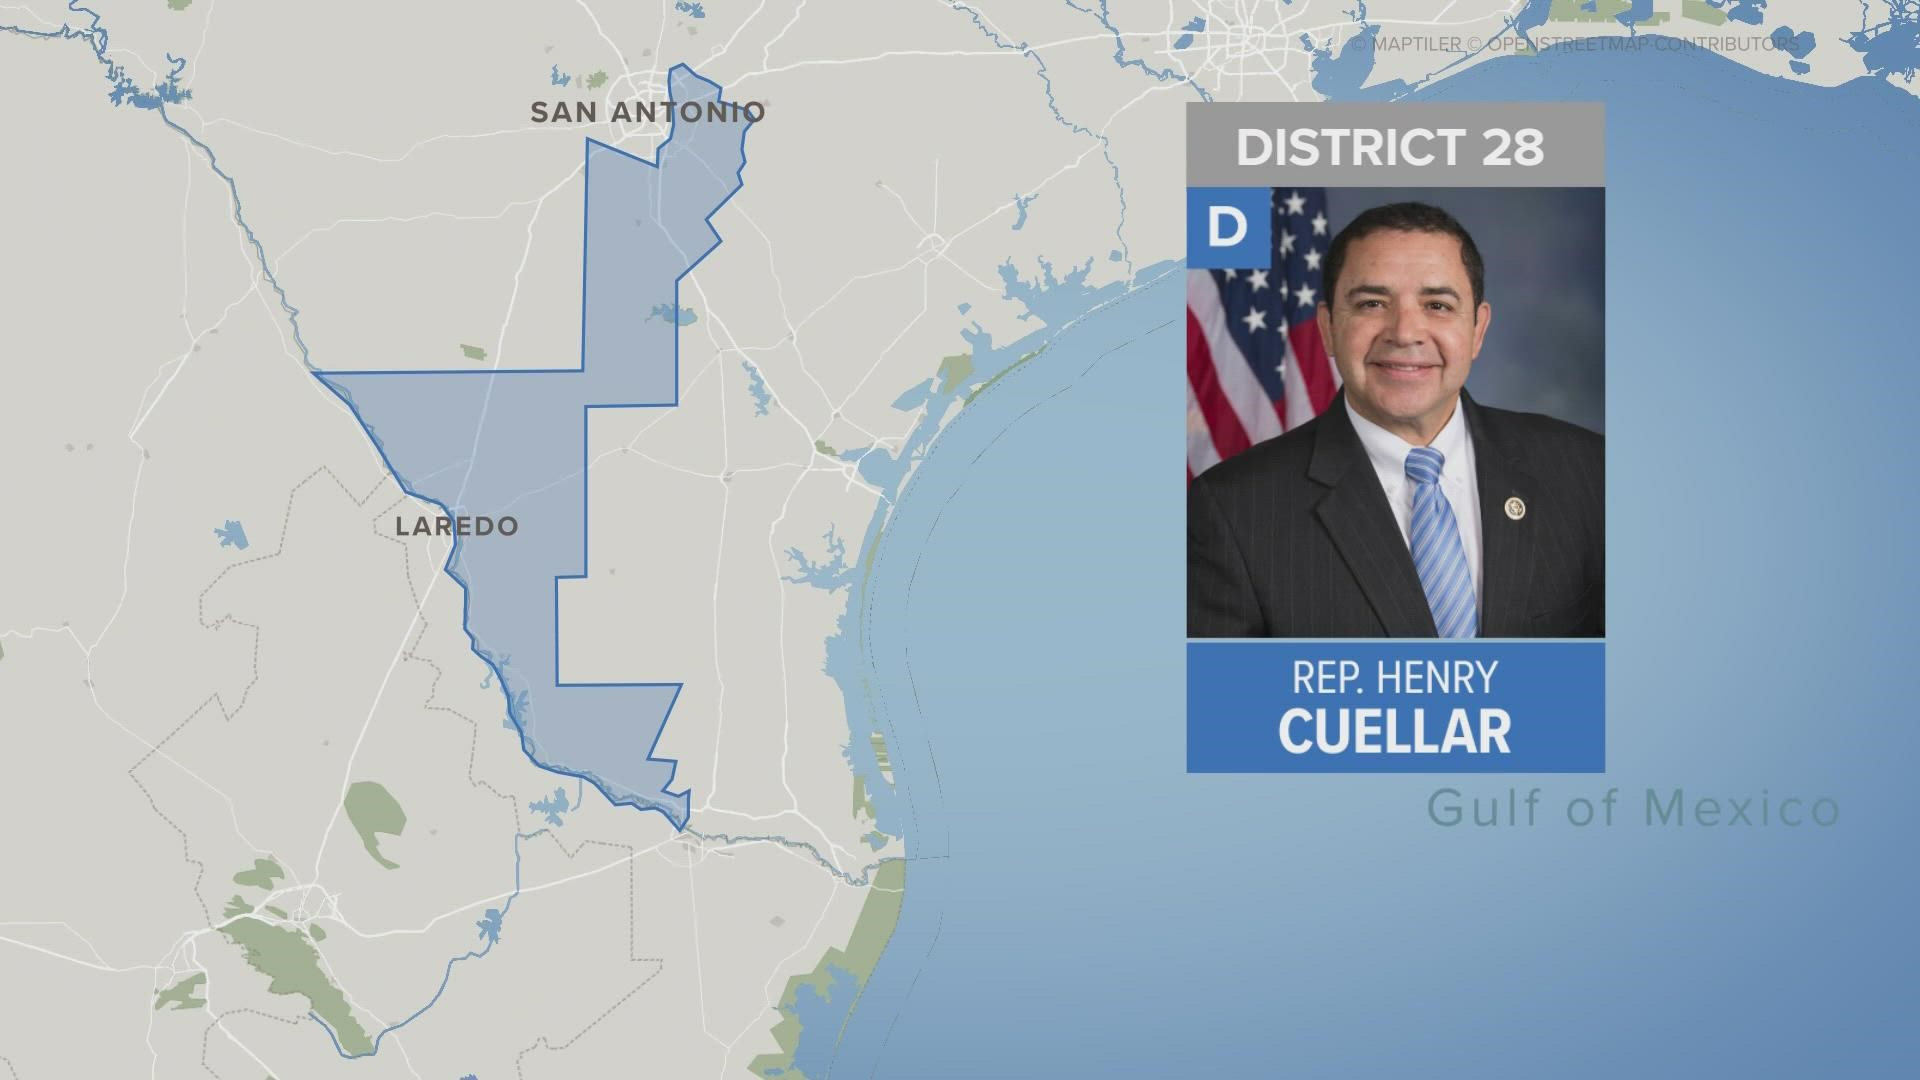 FBI agents were in the area of U.S. Rep. Henry Cuellar's Laredo home, although specifics as to why remain unclear.